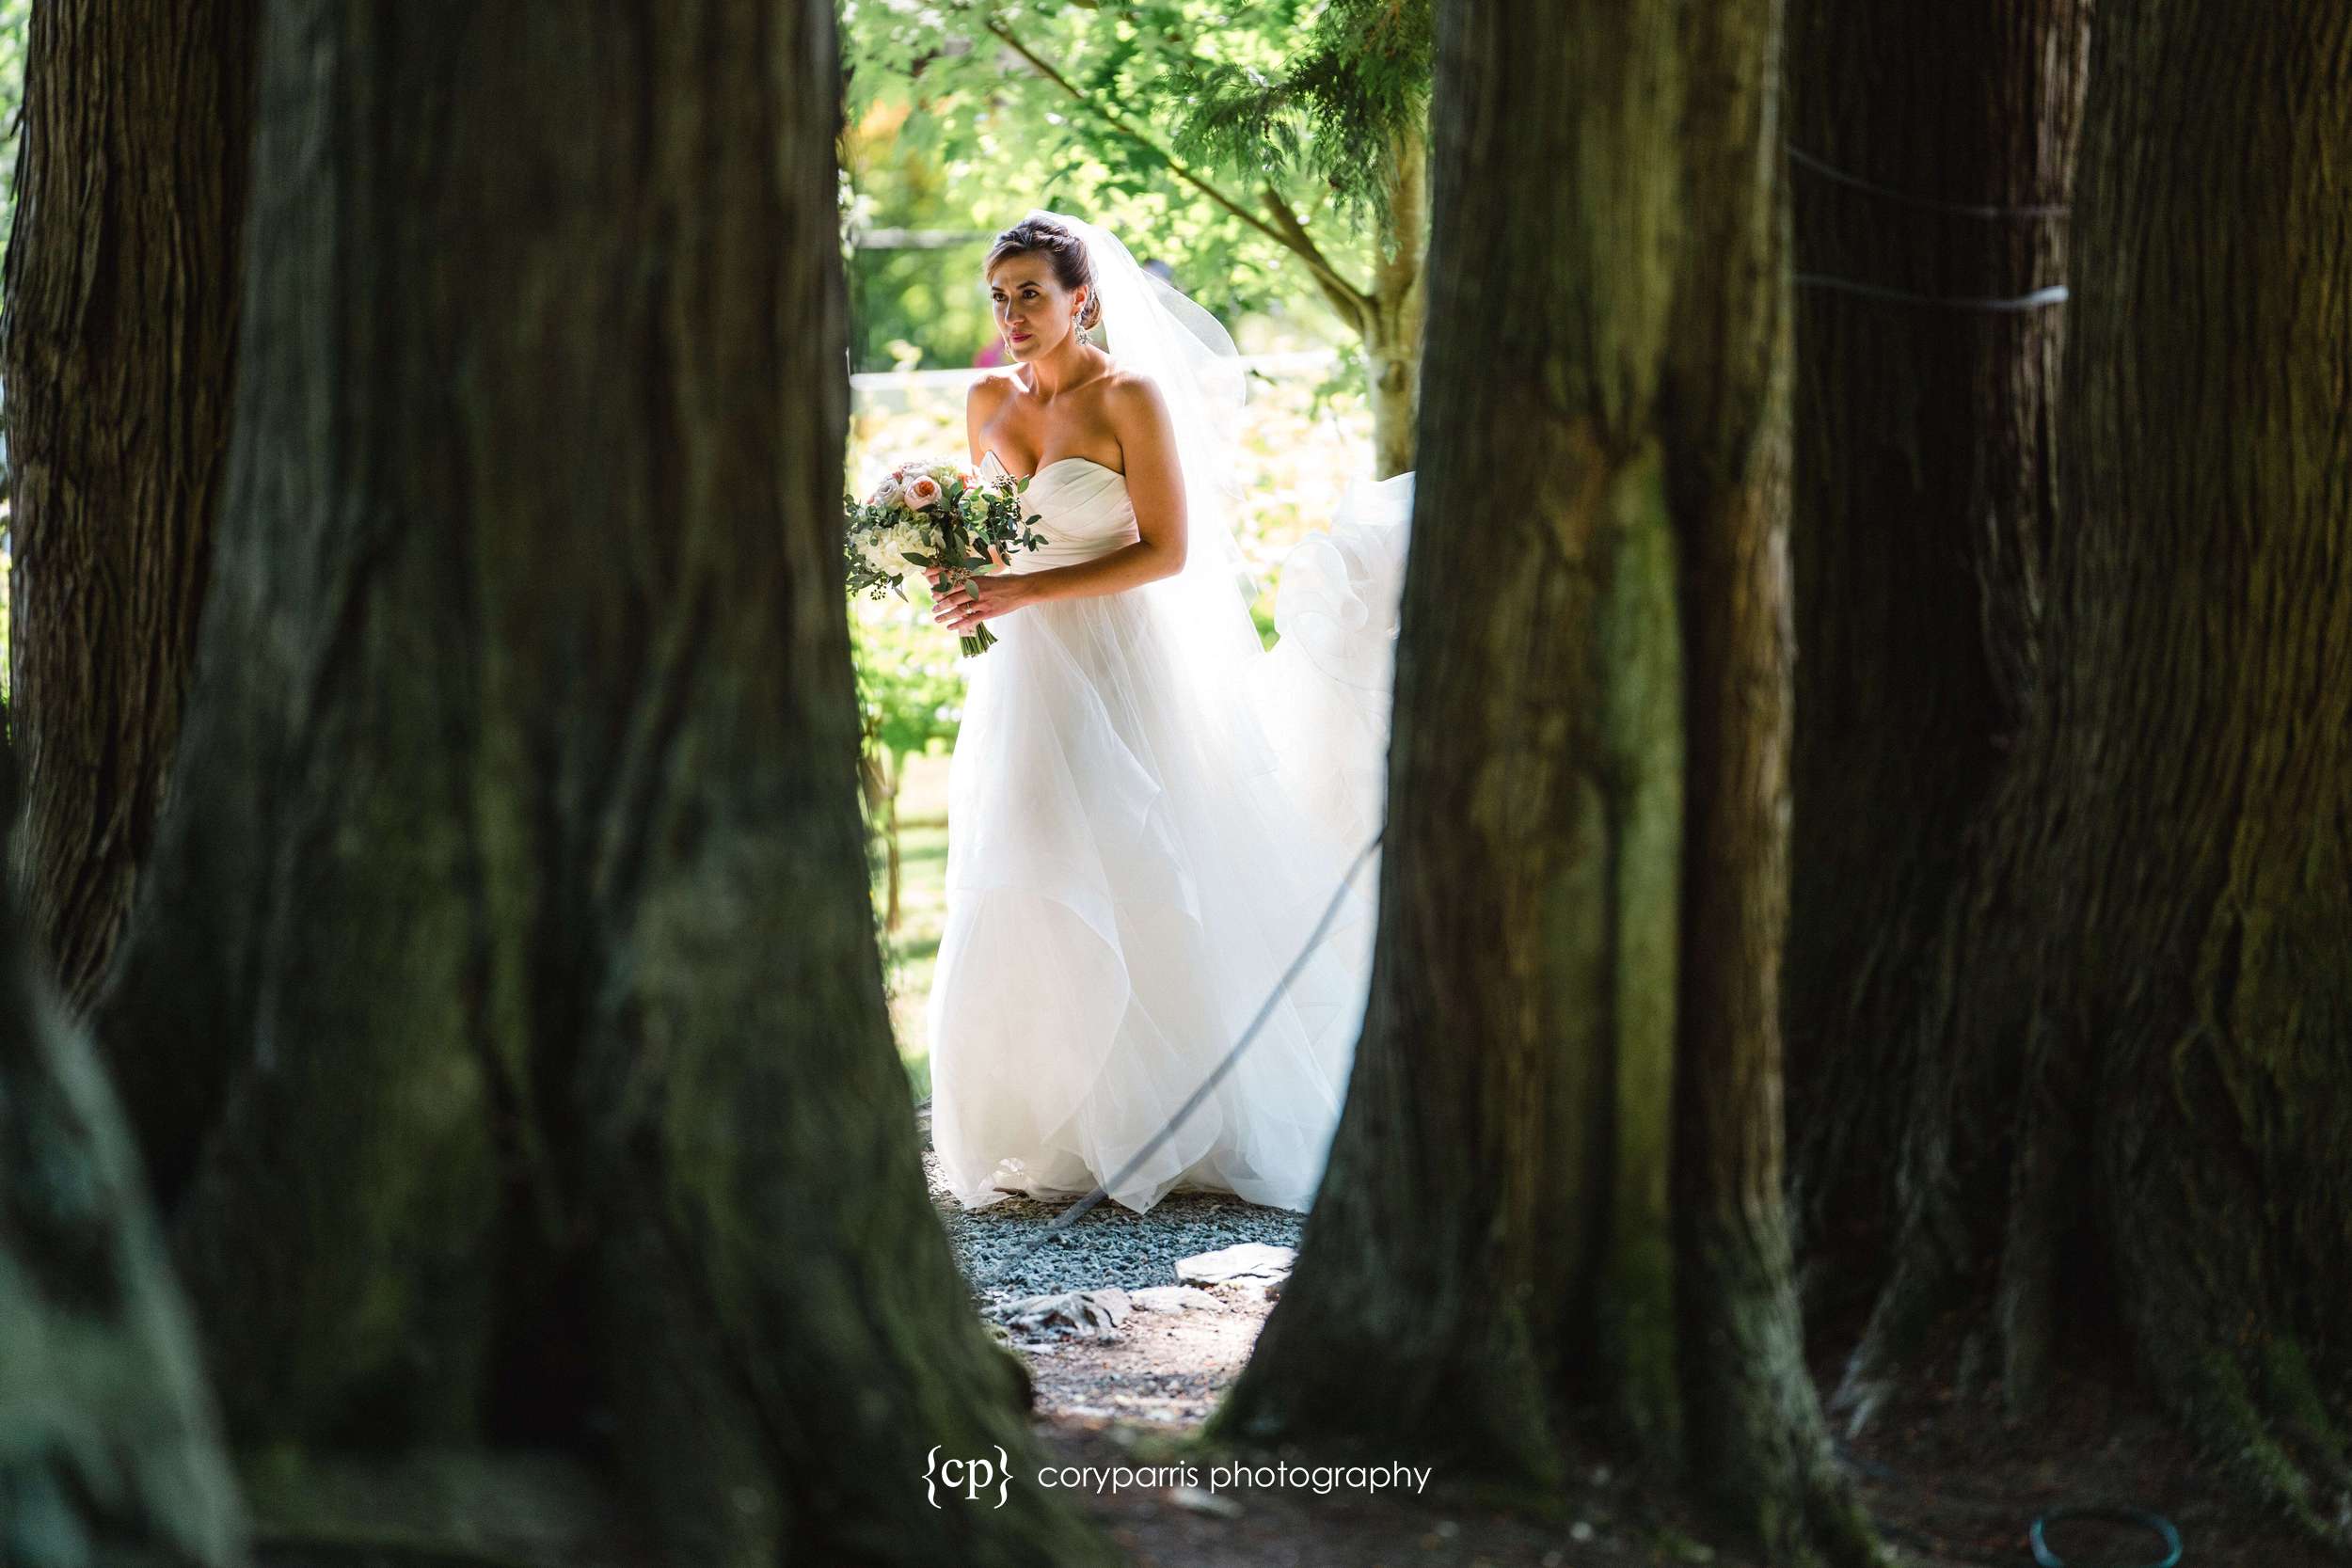 Ashley making her way through the trees to her wedding